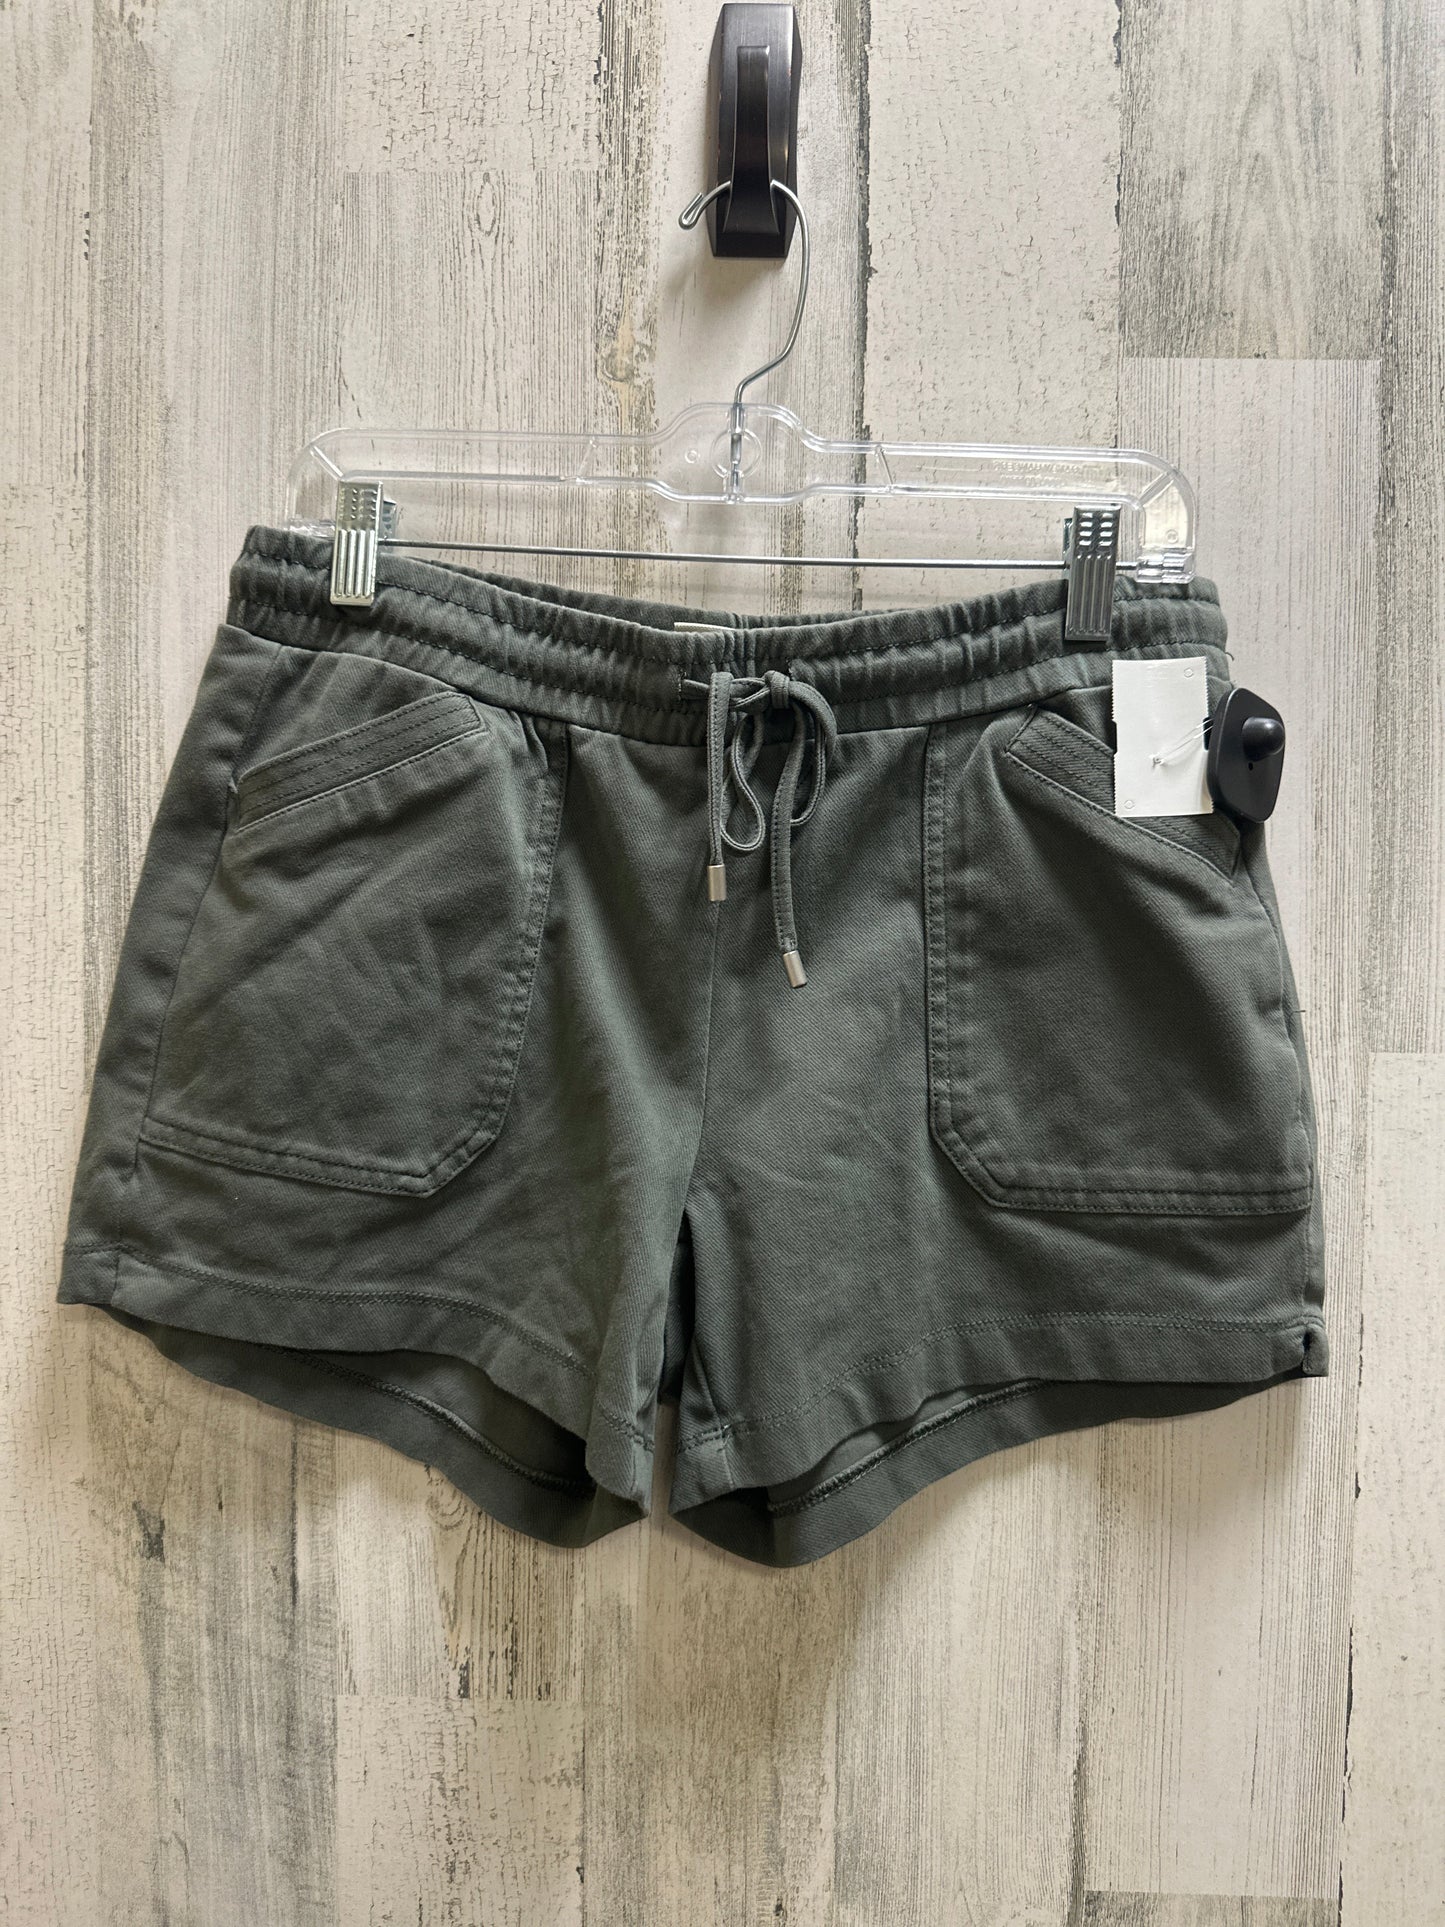 Green Shorts St John Collection, Size 4